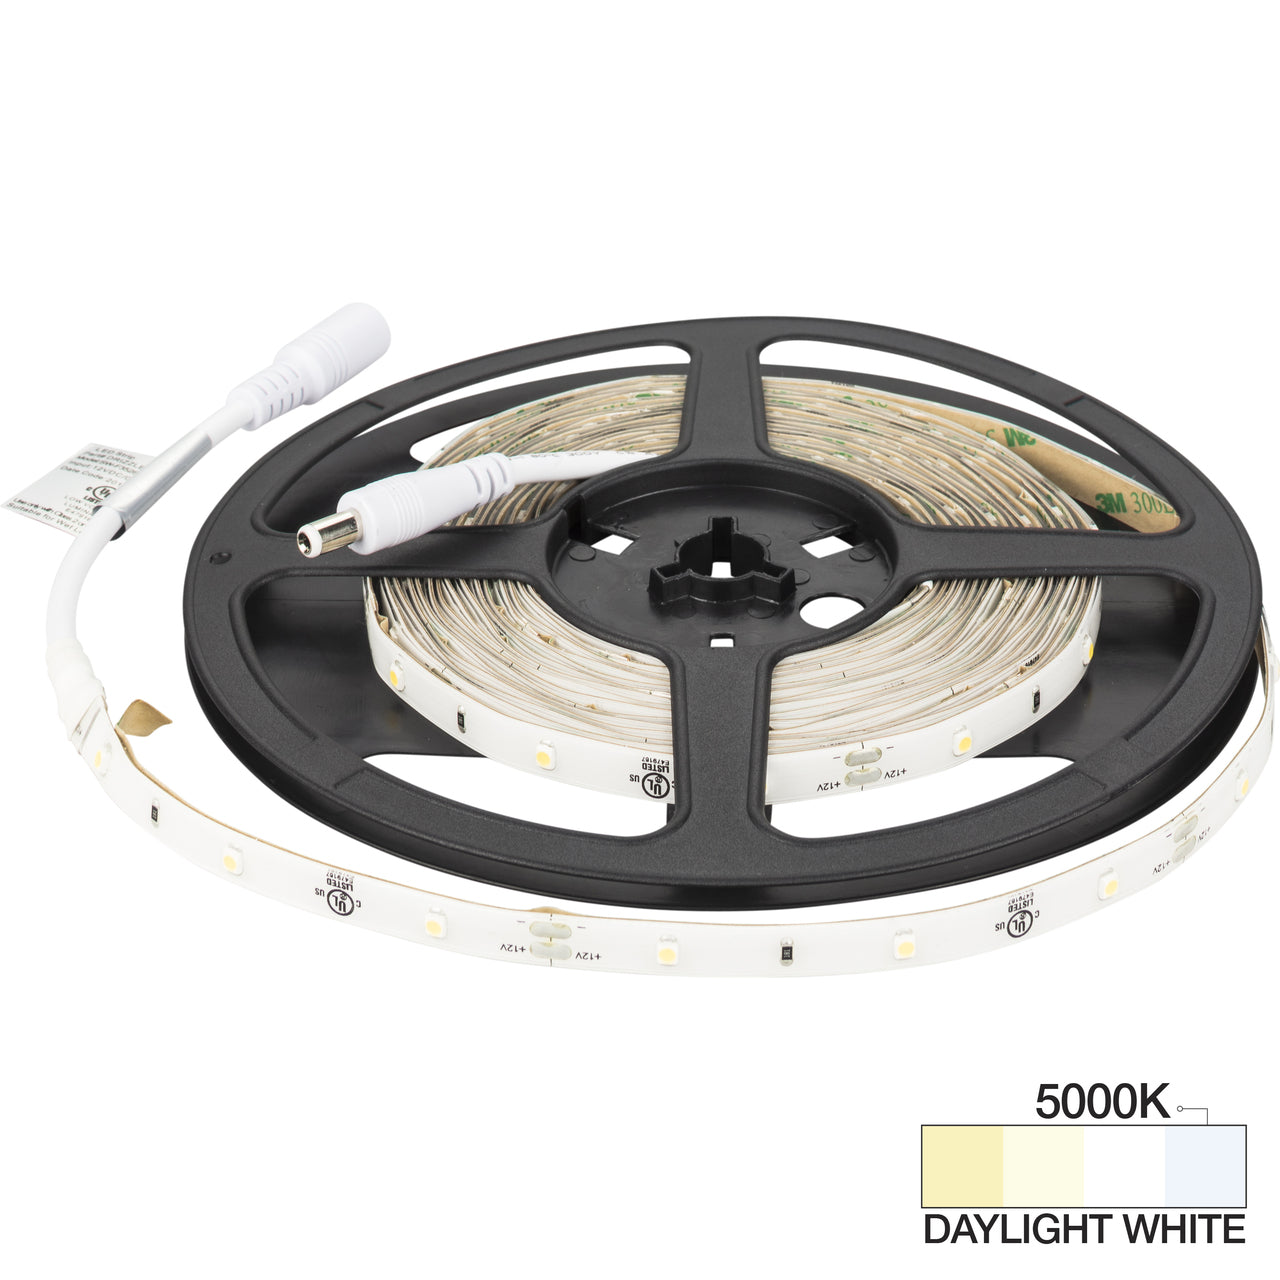 ILLUMA Drizzle LED Tape Lighting With Micro Waterproof Coating – 5000k 49 Lumens per ft. (Not recommended for undercabinet lighting)